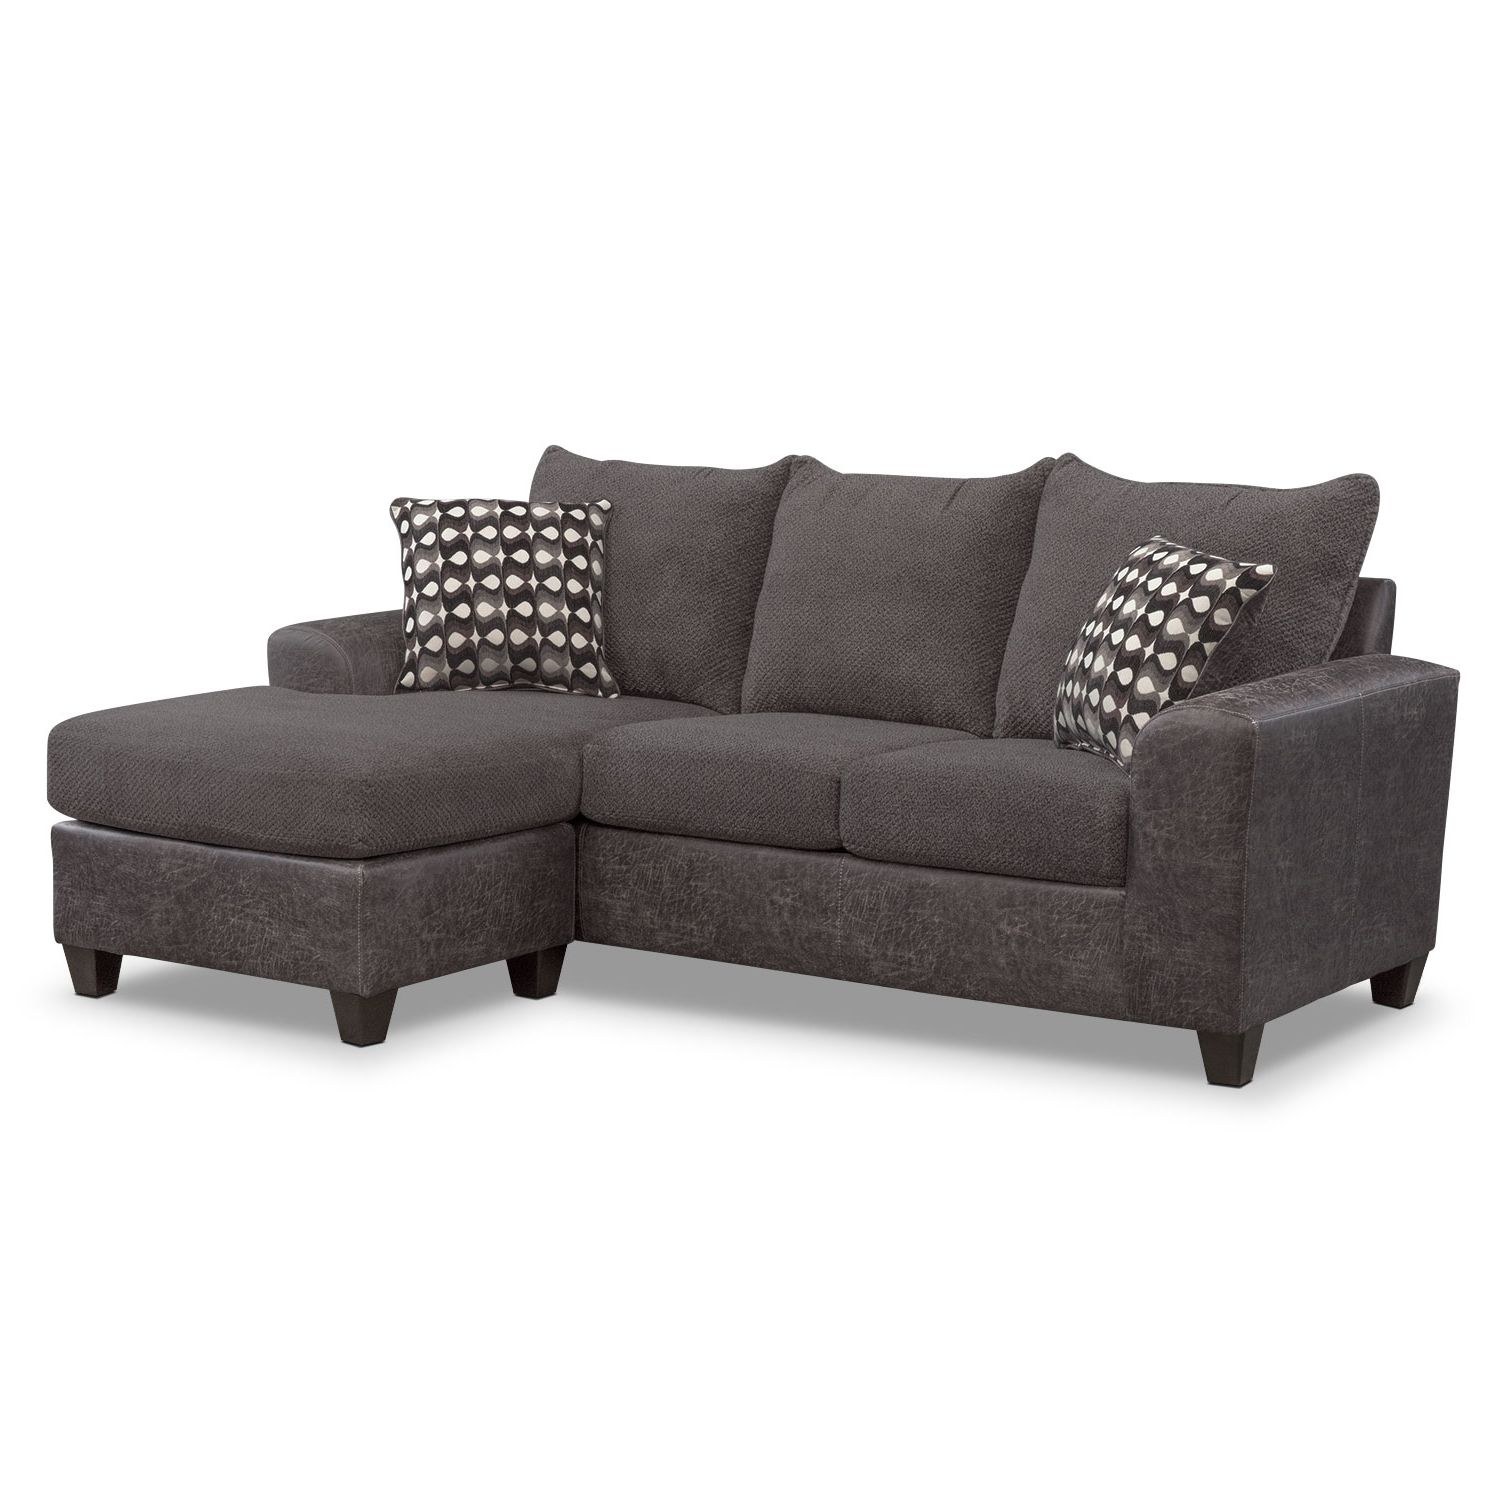 American Signature Furniture For Widely Used Chaise Lounge Couches (View 6 of 15)